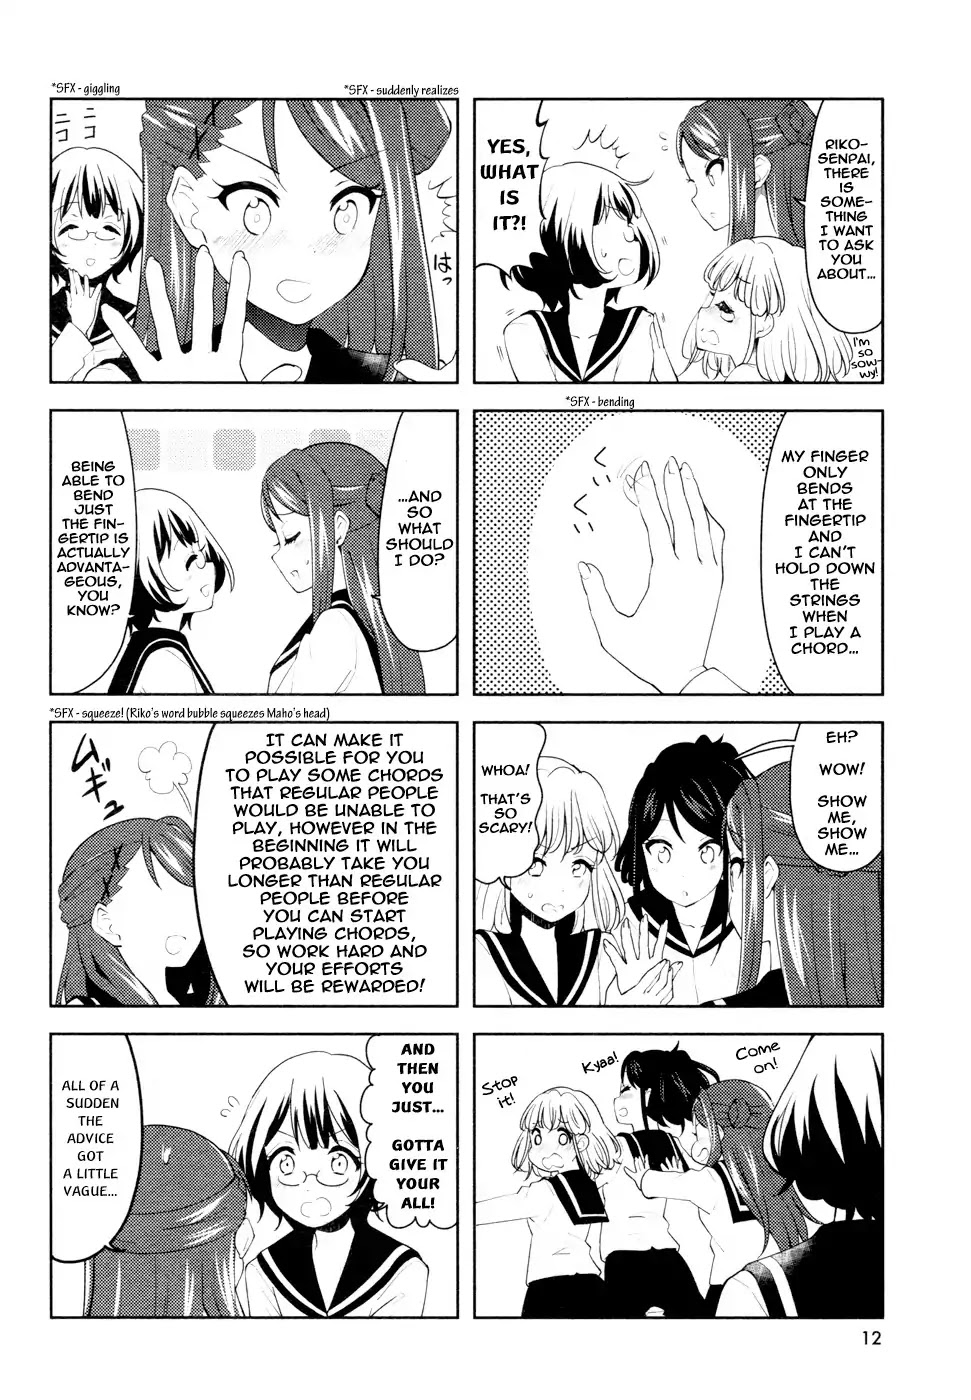 K-On! Shuffle - Page 2